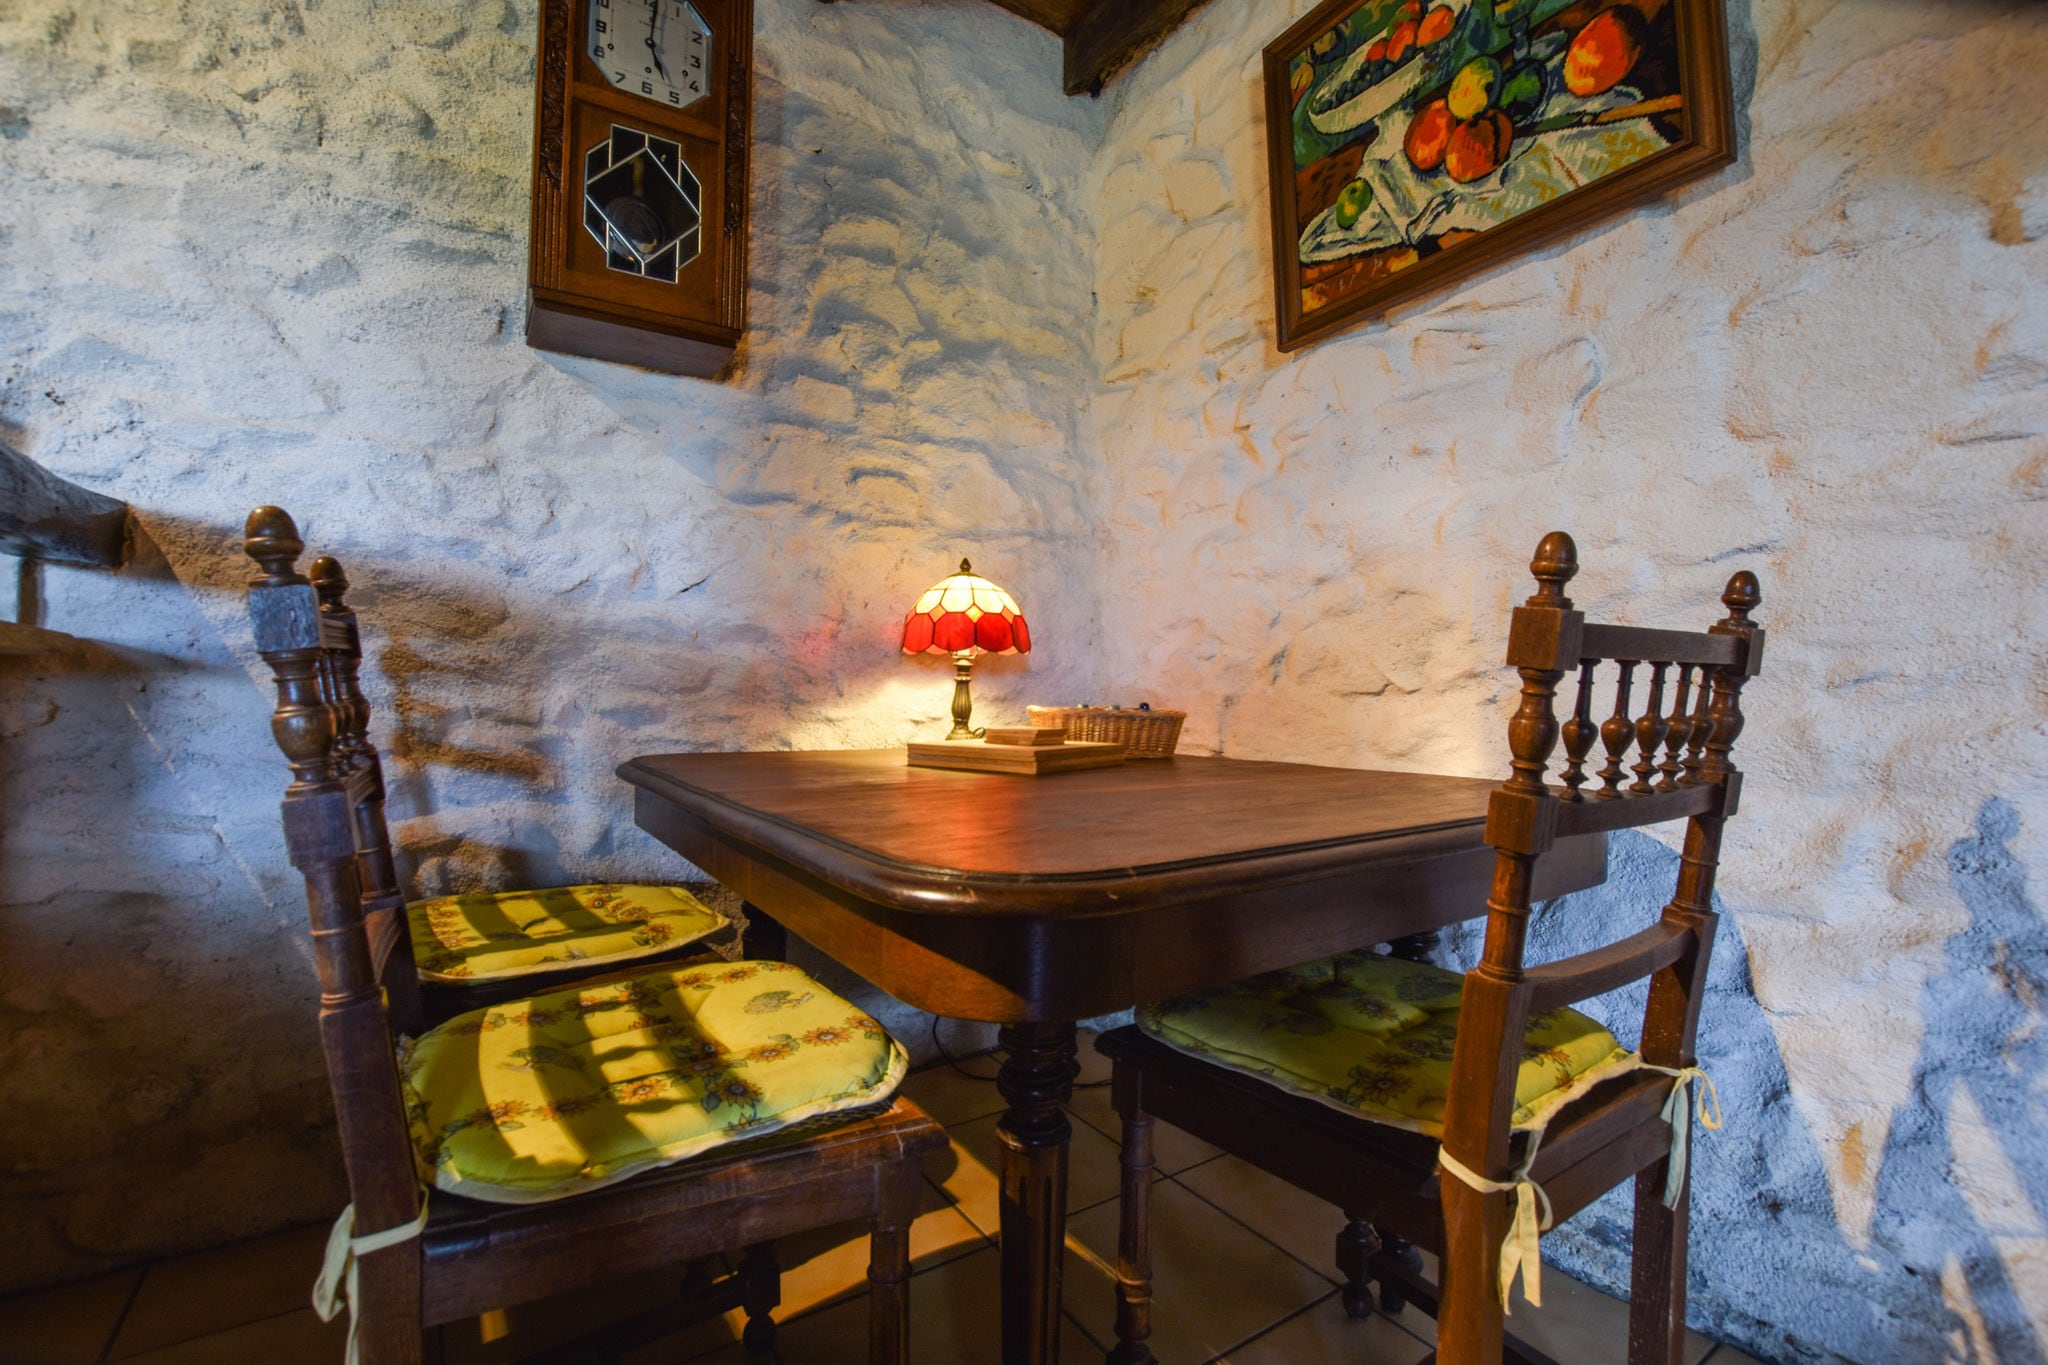 Charming typical Auvergne cottage with large garden and view of the countryside.